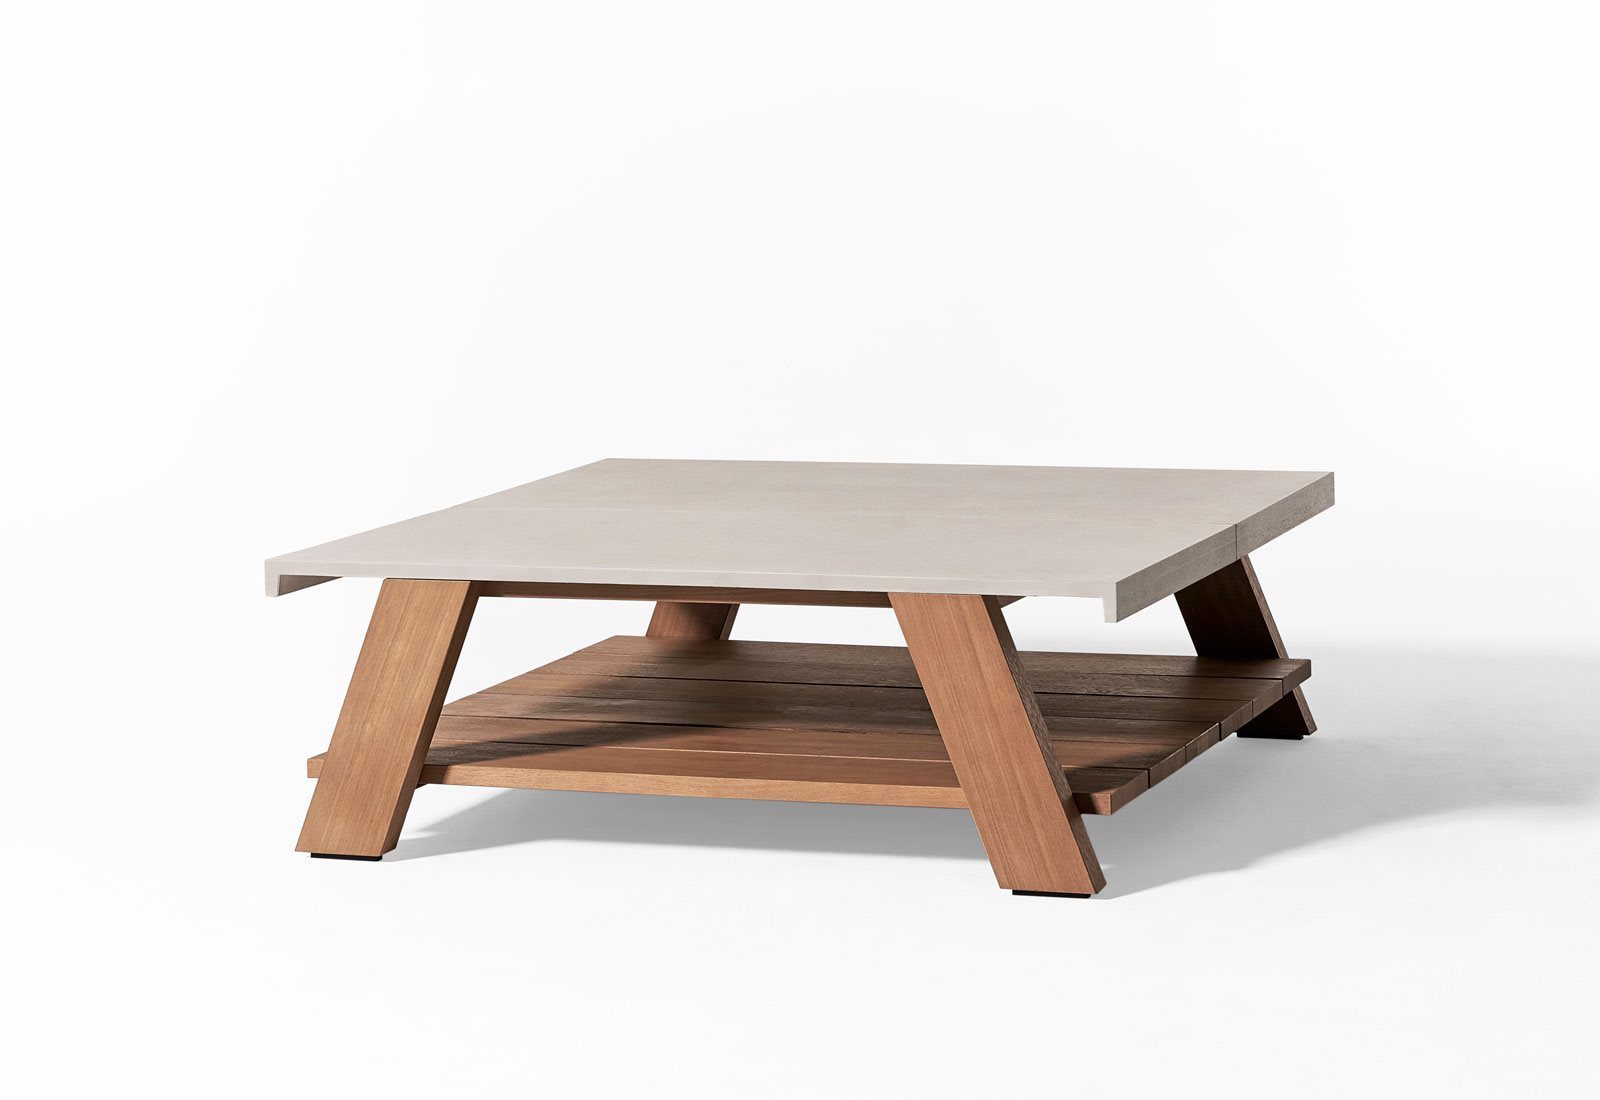 Joi-open-air-low-table-01-1600x1100